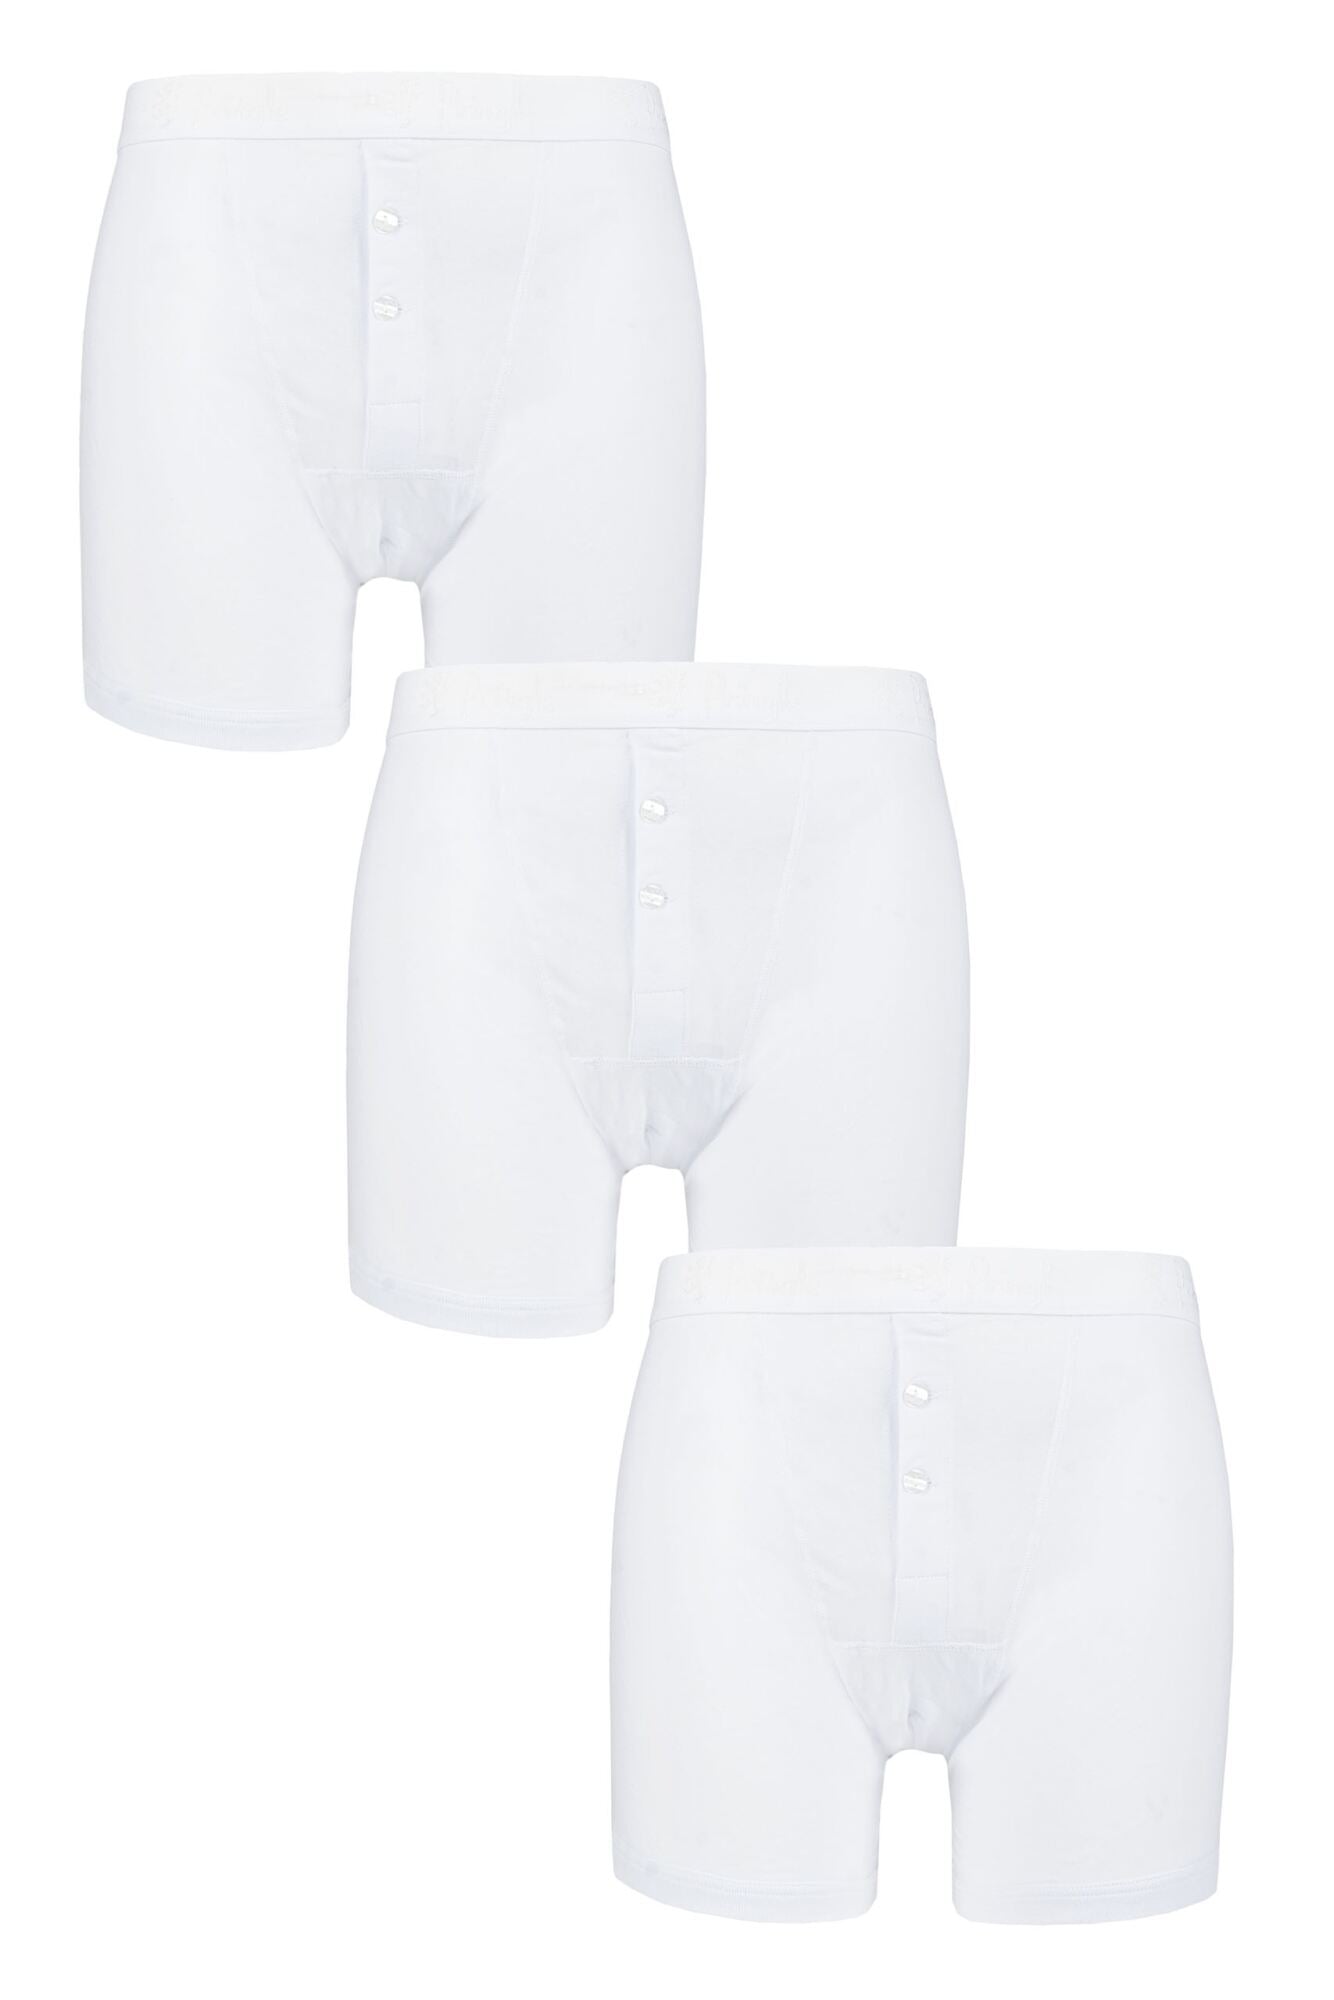 Matalan 3 Pack Jersey Boxers price in Egypt